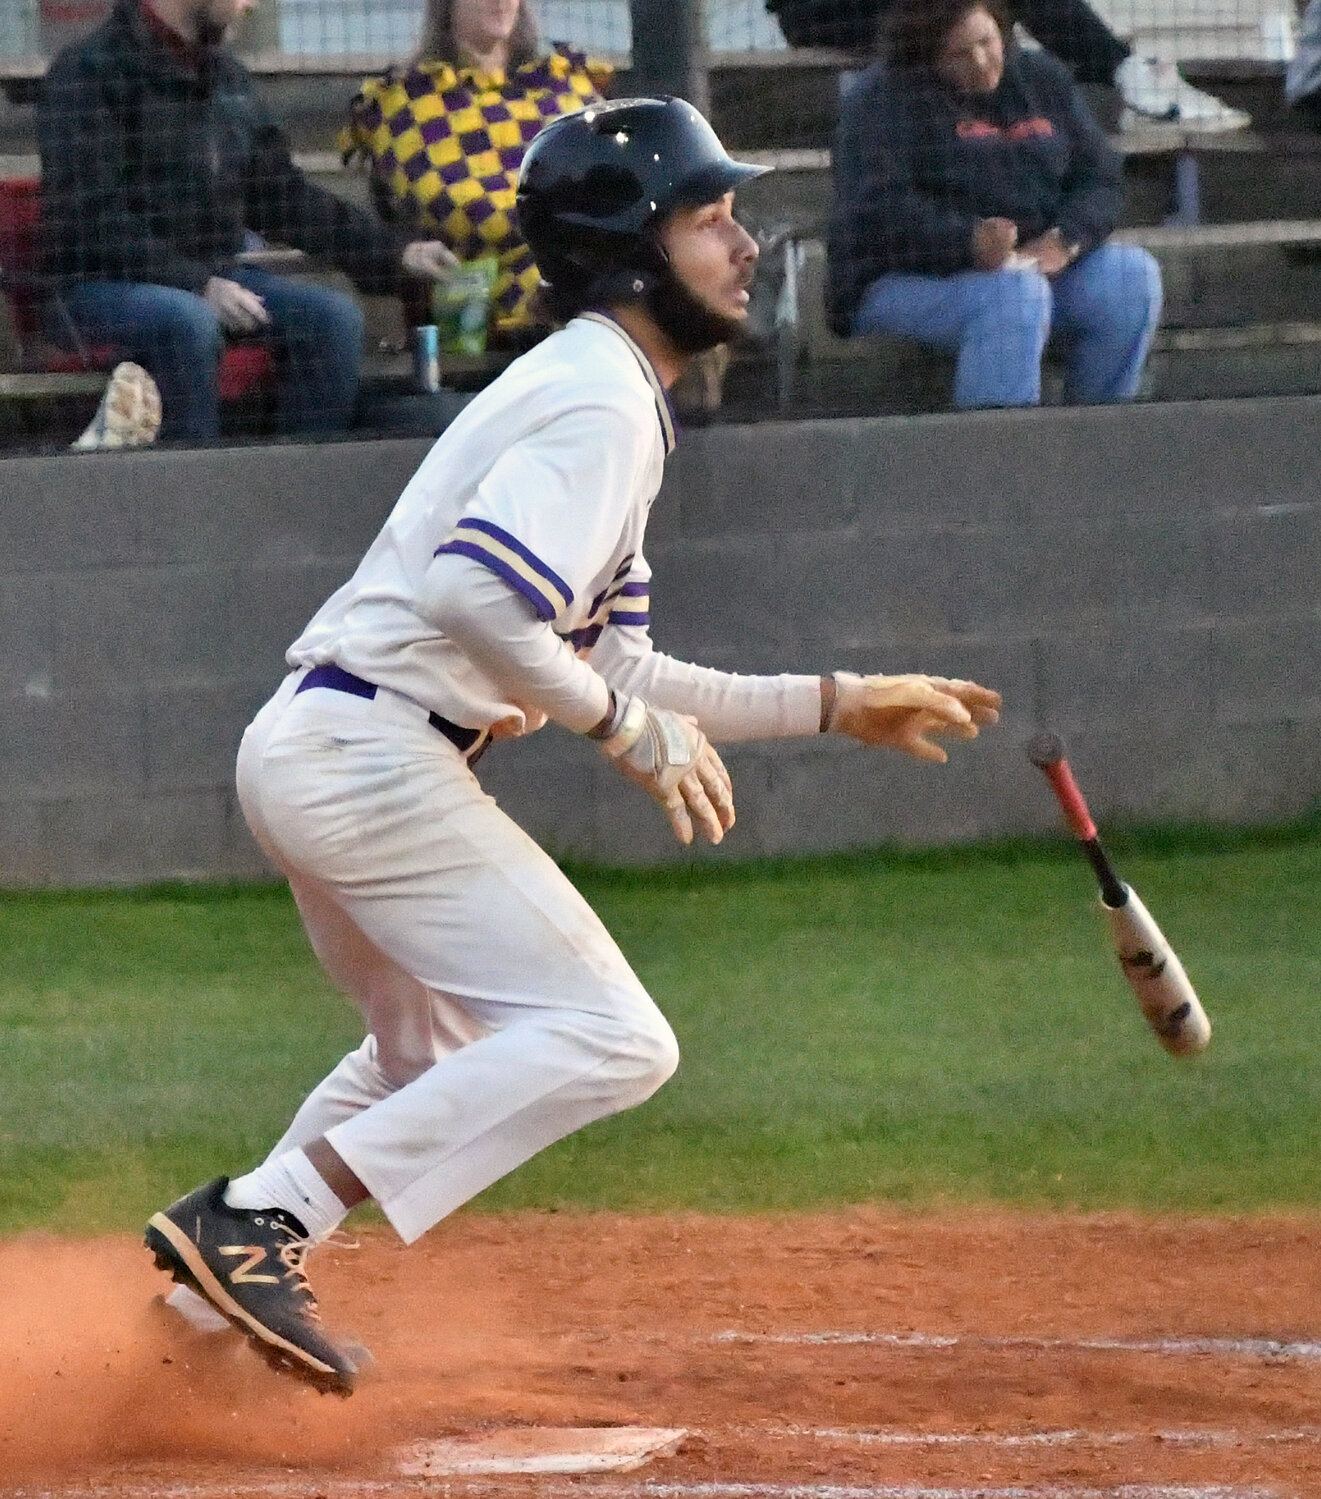 Maki Fleming of the Vikings drops his bat after delivering a triple in the third inning. Fleming had four hits and four RBIs for Community.